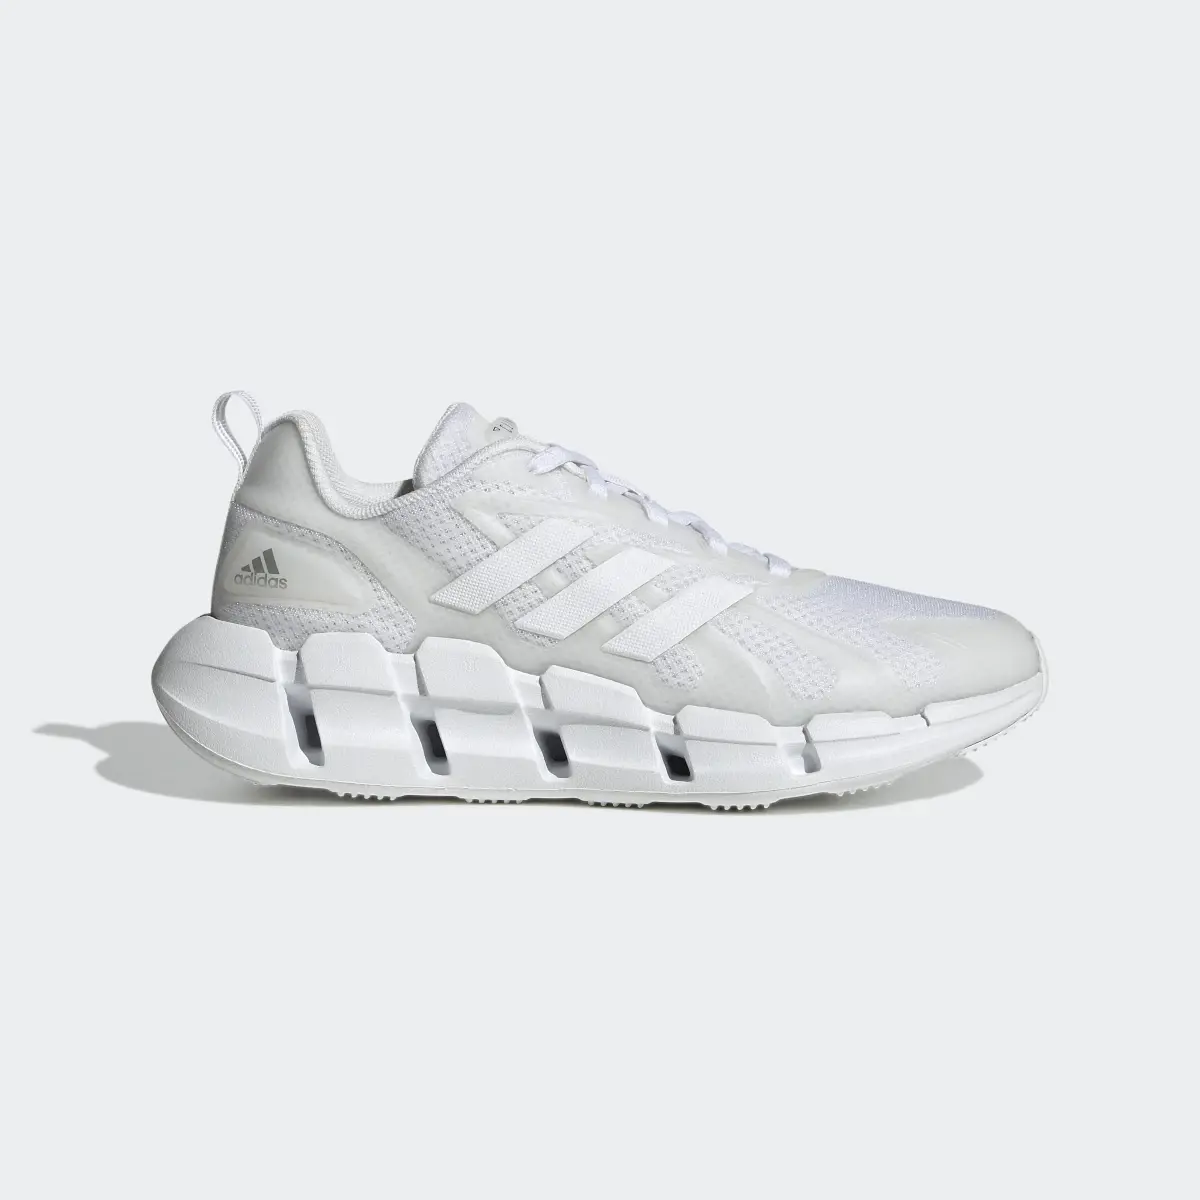 Adidas Ventice Climacool Shoes. 2